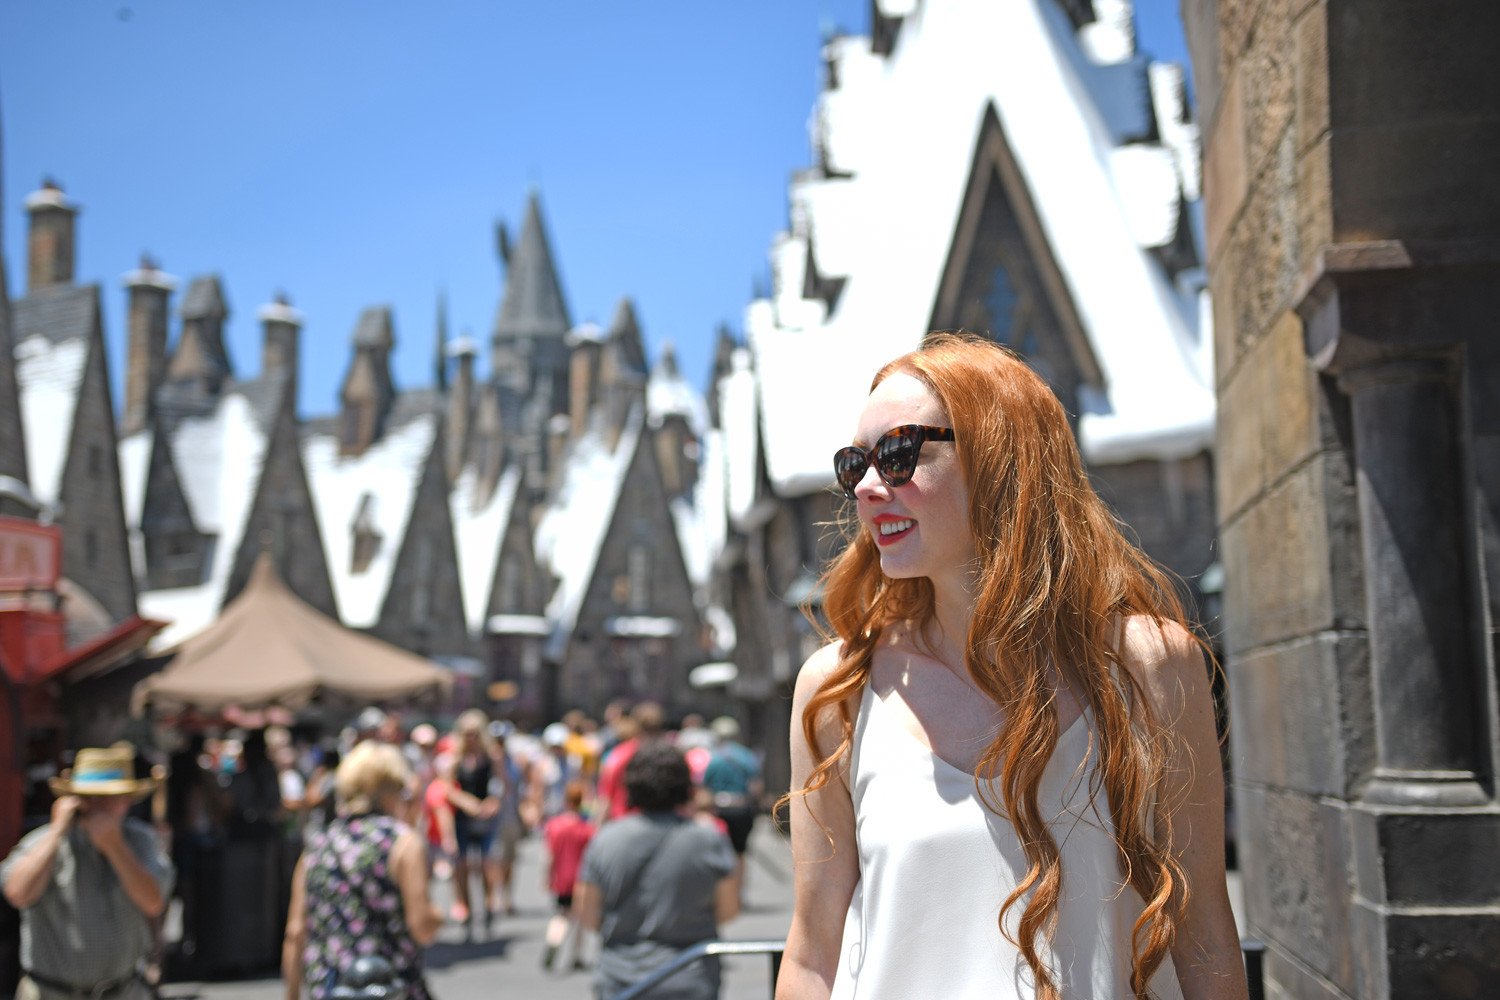 Visiting the Wizarding World of Harry Potter in Orlando, Florida